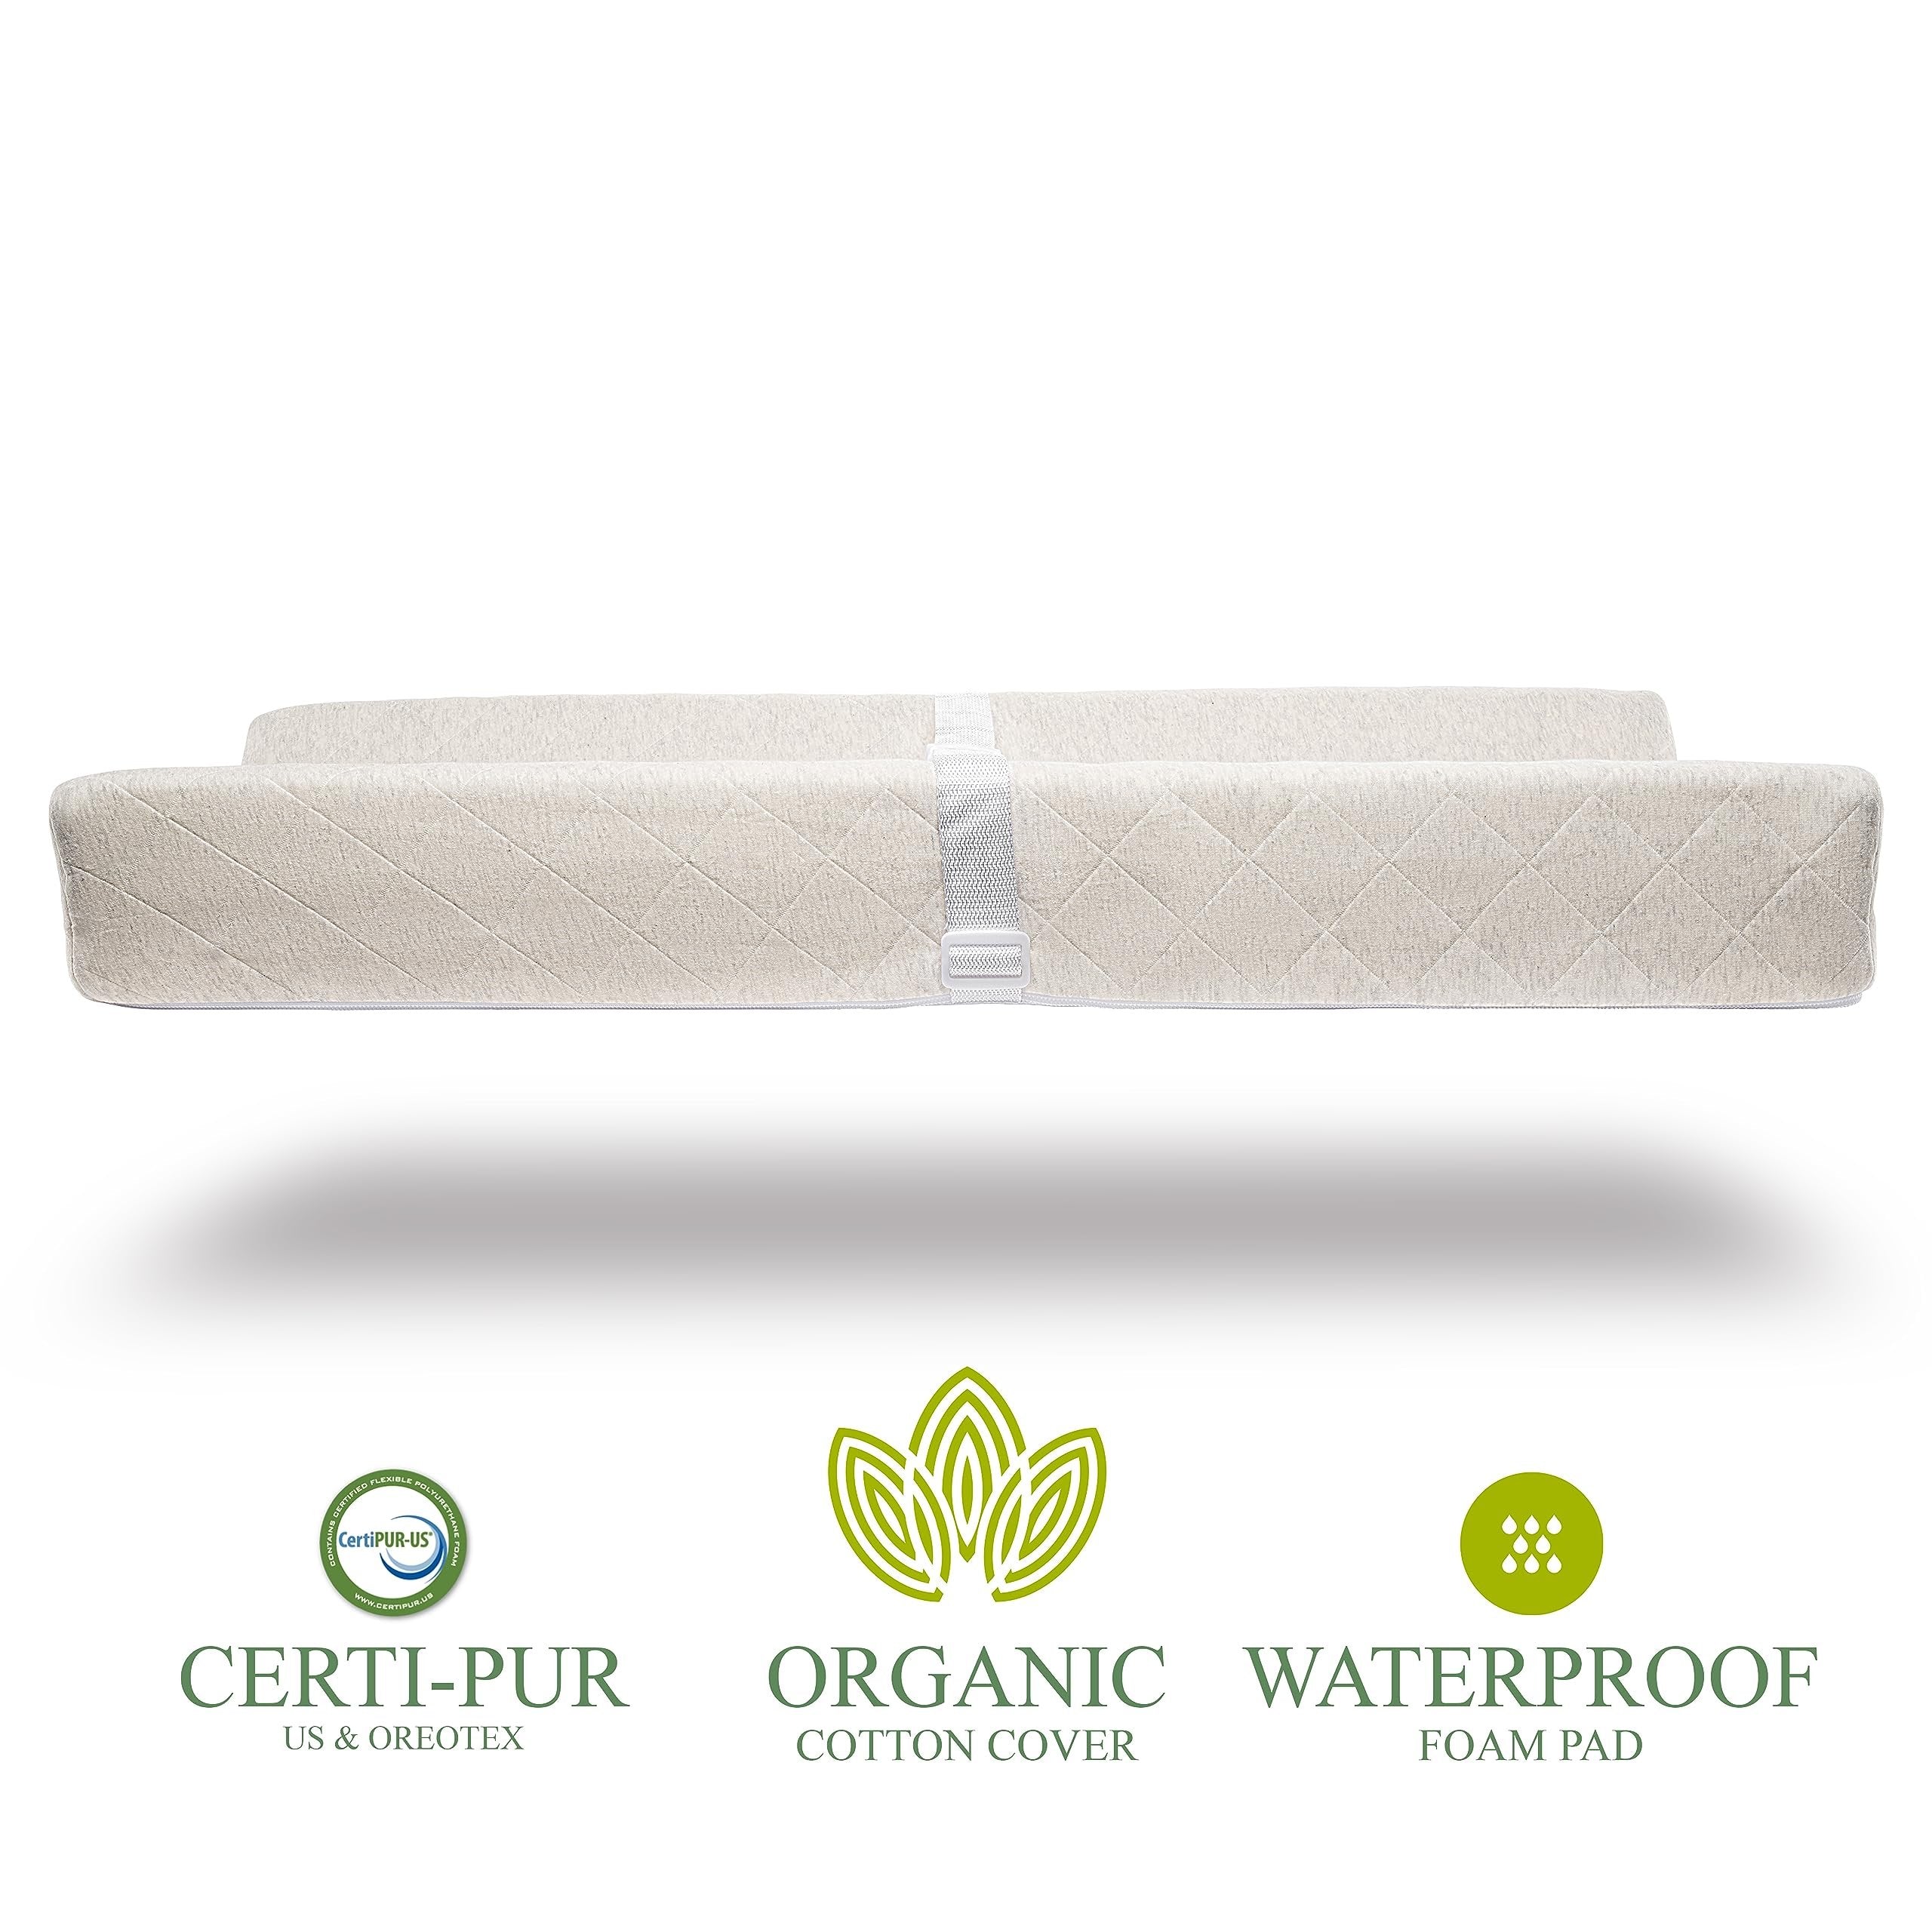 Organic Cotton Contoured Changing Pad | Topper for Standard Size Infant Diaper Table or Dresser w/Waterproof Cushion Mattress Includes Removable and Washable Cover, Safety Strap, Non-Slip Grip Bottom